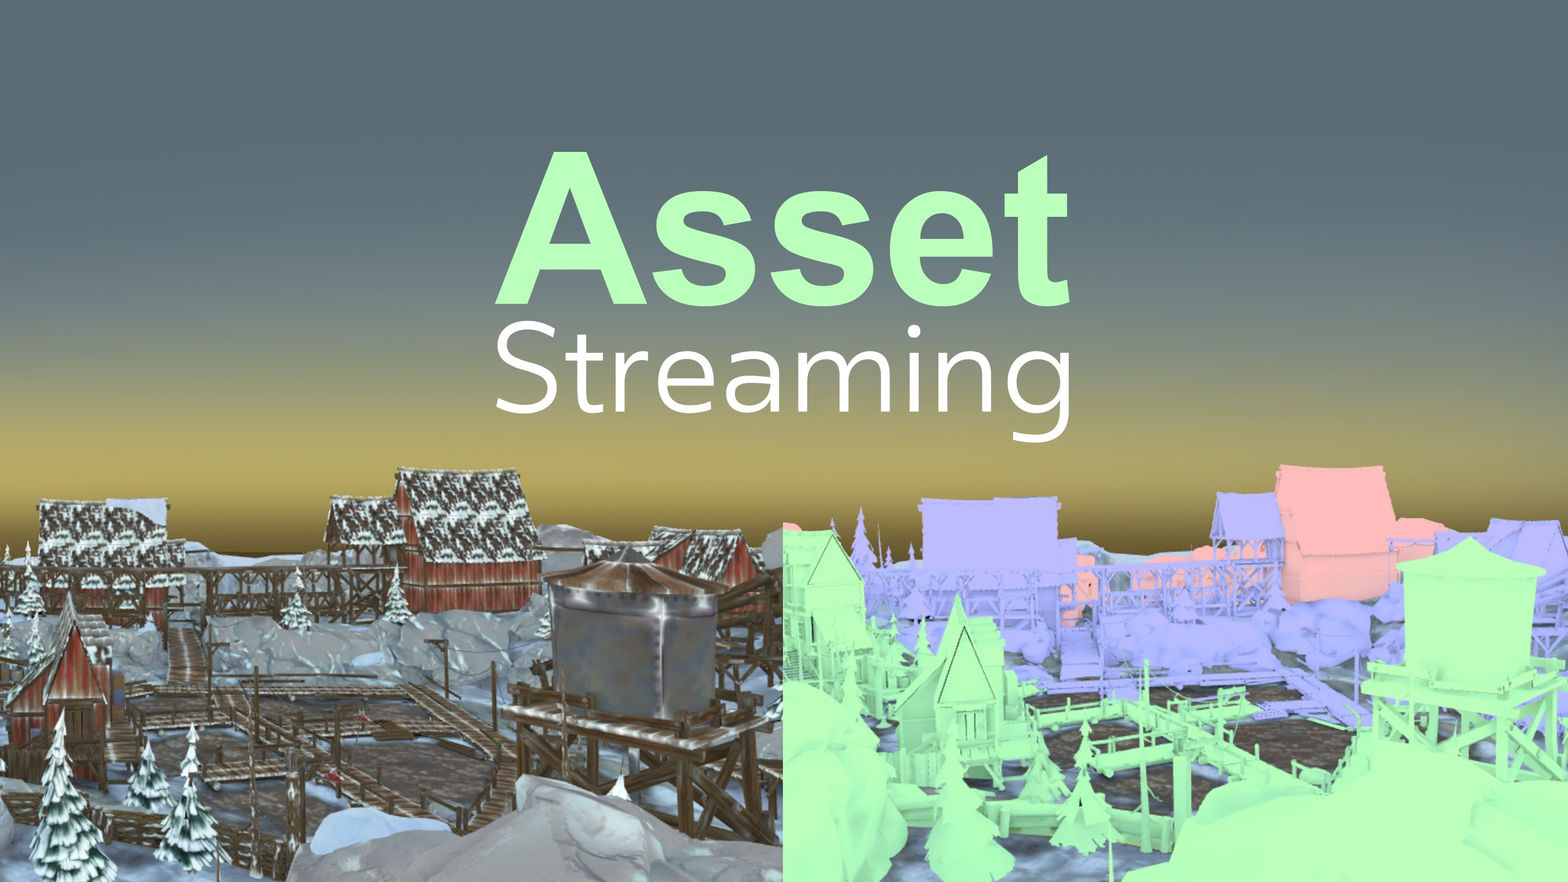 Oculus Asset Streaming for Unity